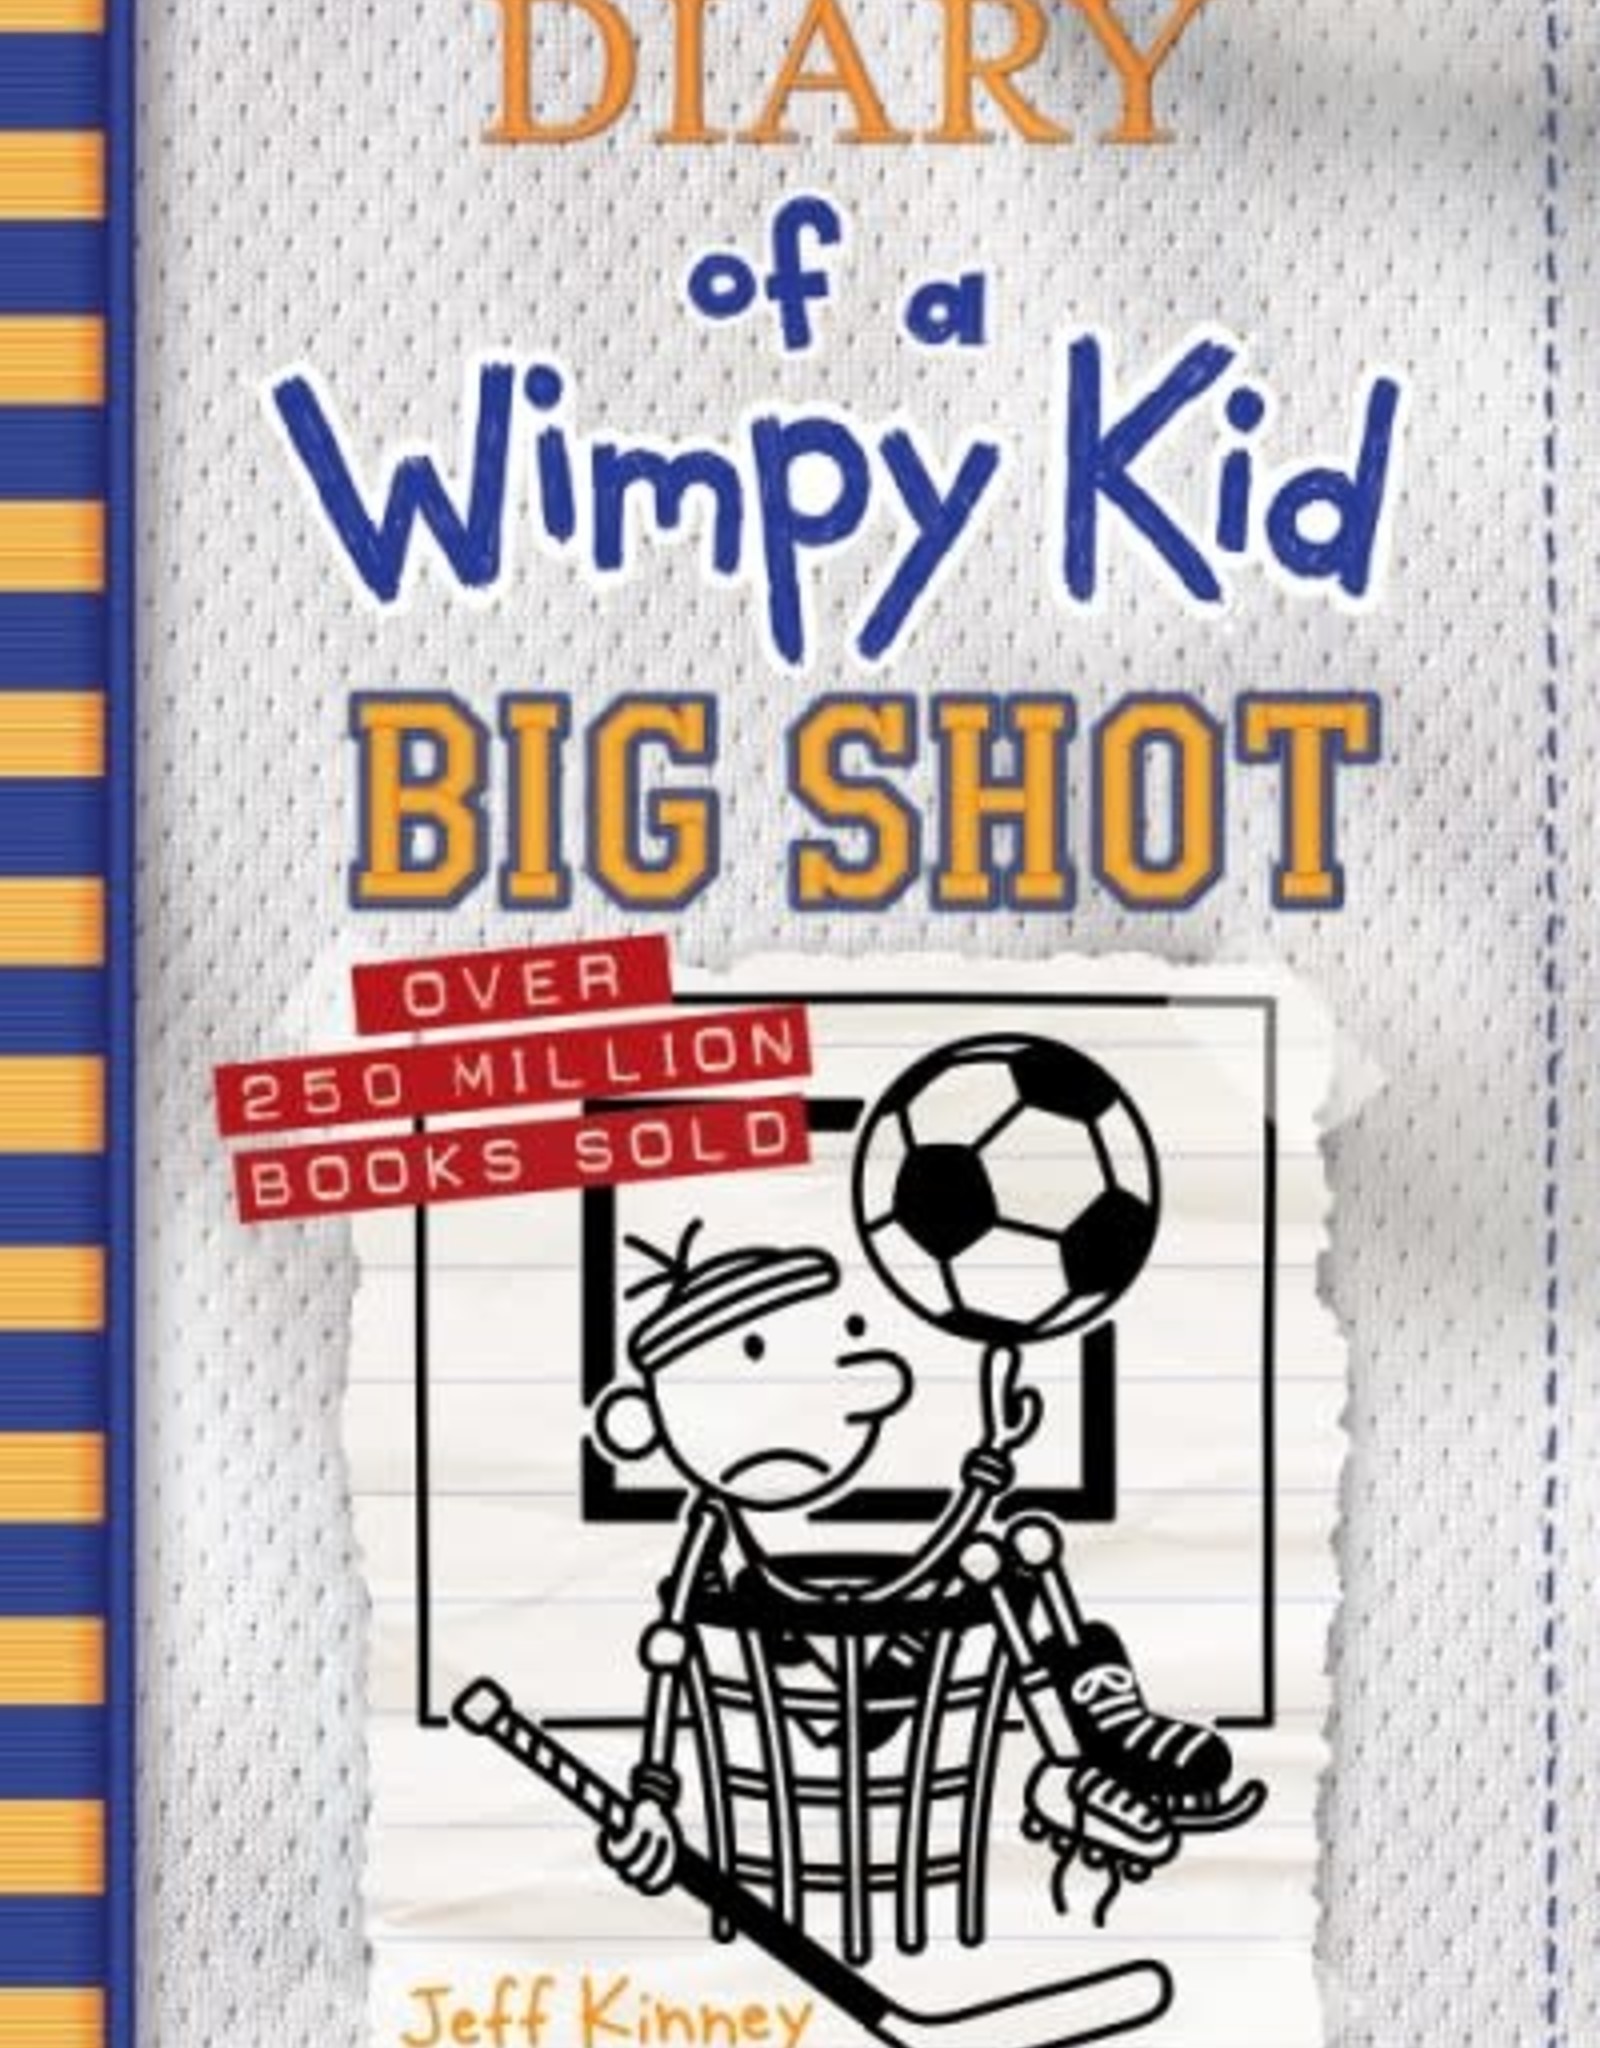 Abrams Diary of a Wimpy Kid #16